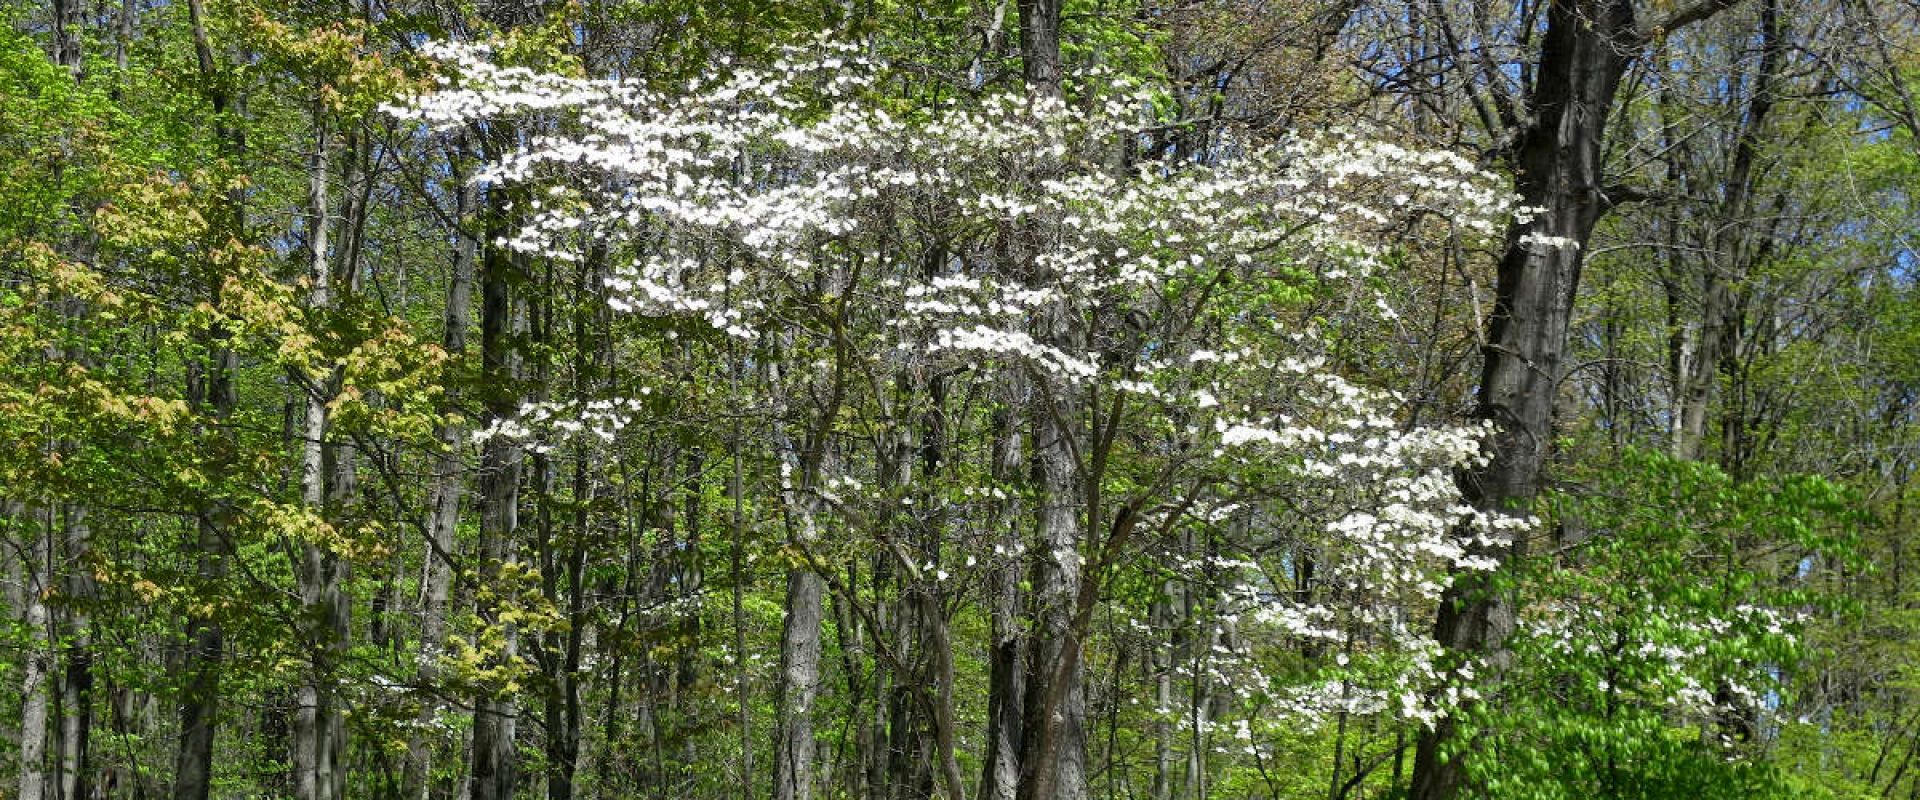 White flowers of the Flowering Dogwood shrub stand out against the deciduous foliage at Skunk's Misery (The Mosa Forest).